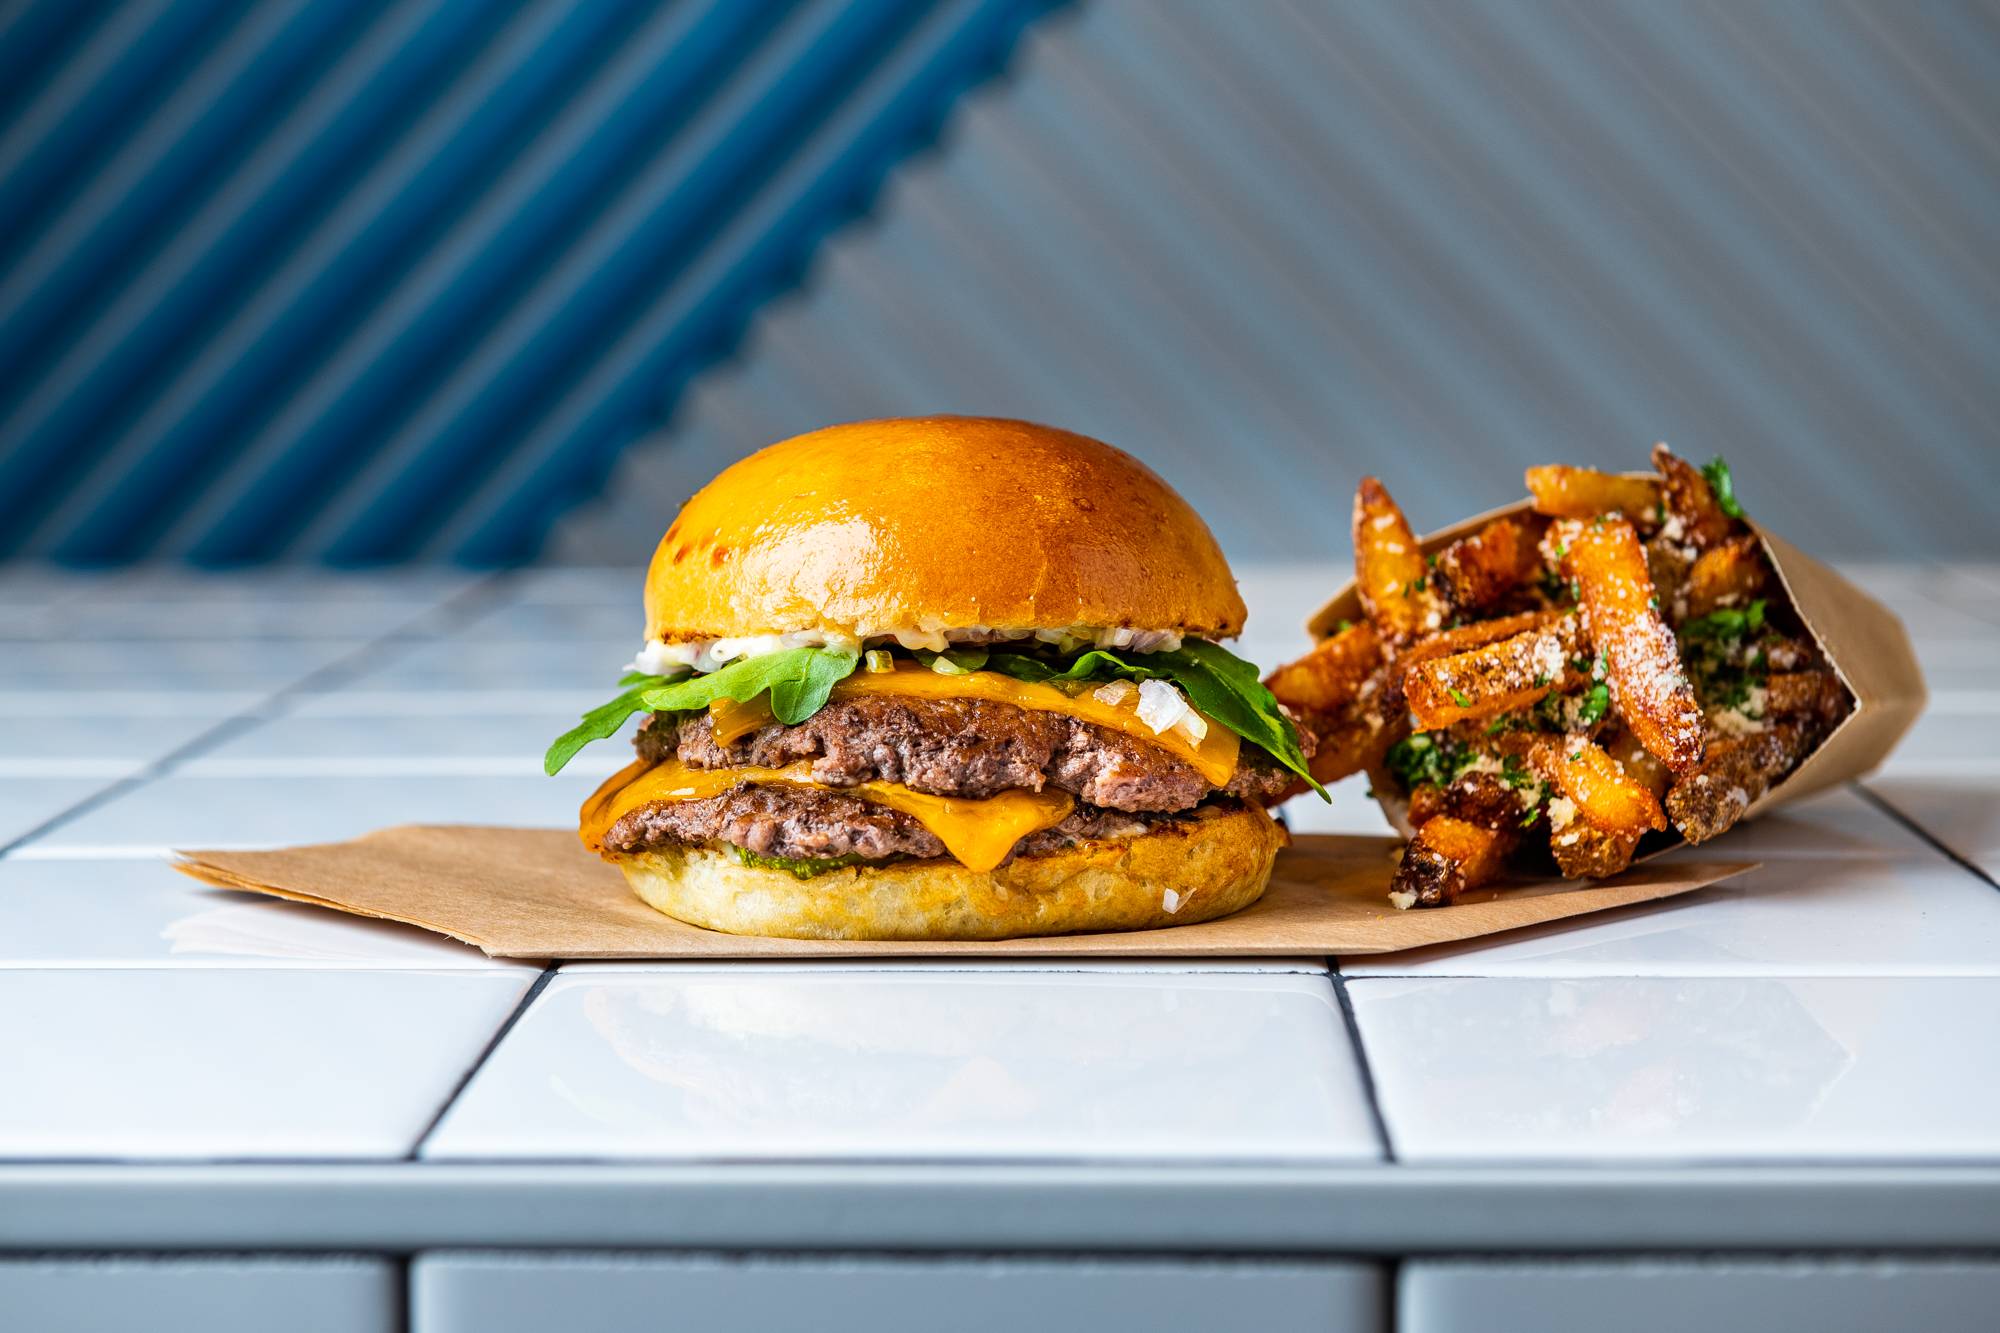 A beef burger patty with arugula, dill pickle, stack sauce, and Parmesan truffle fries.